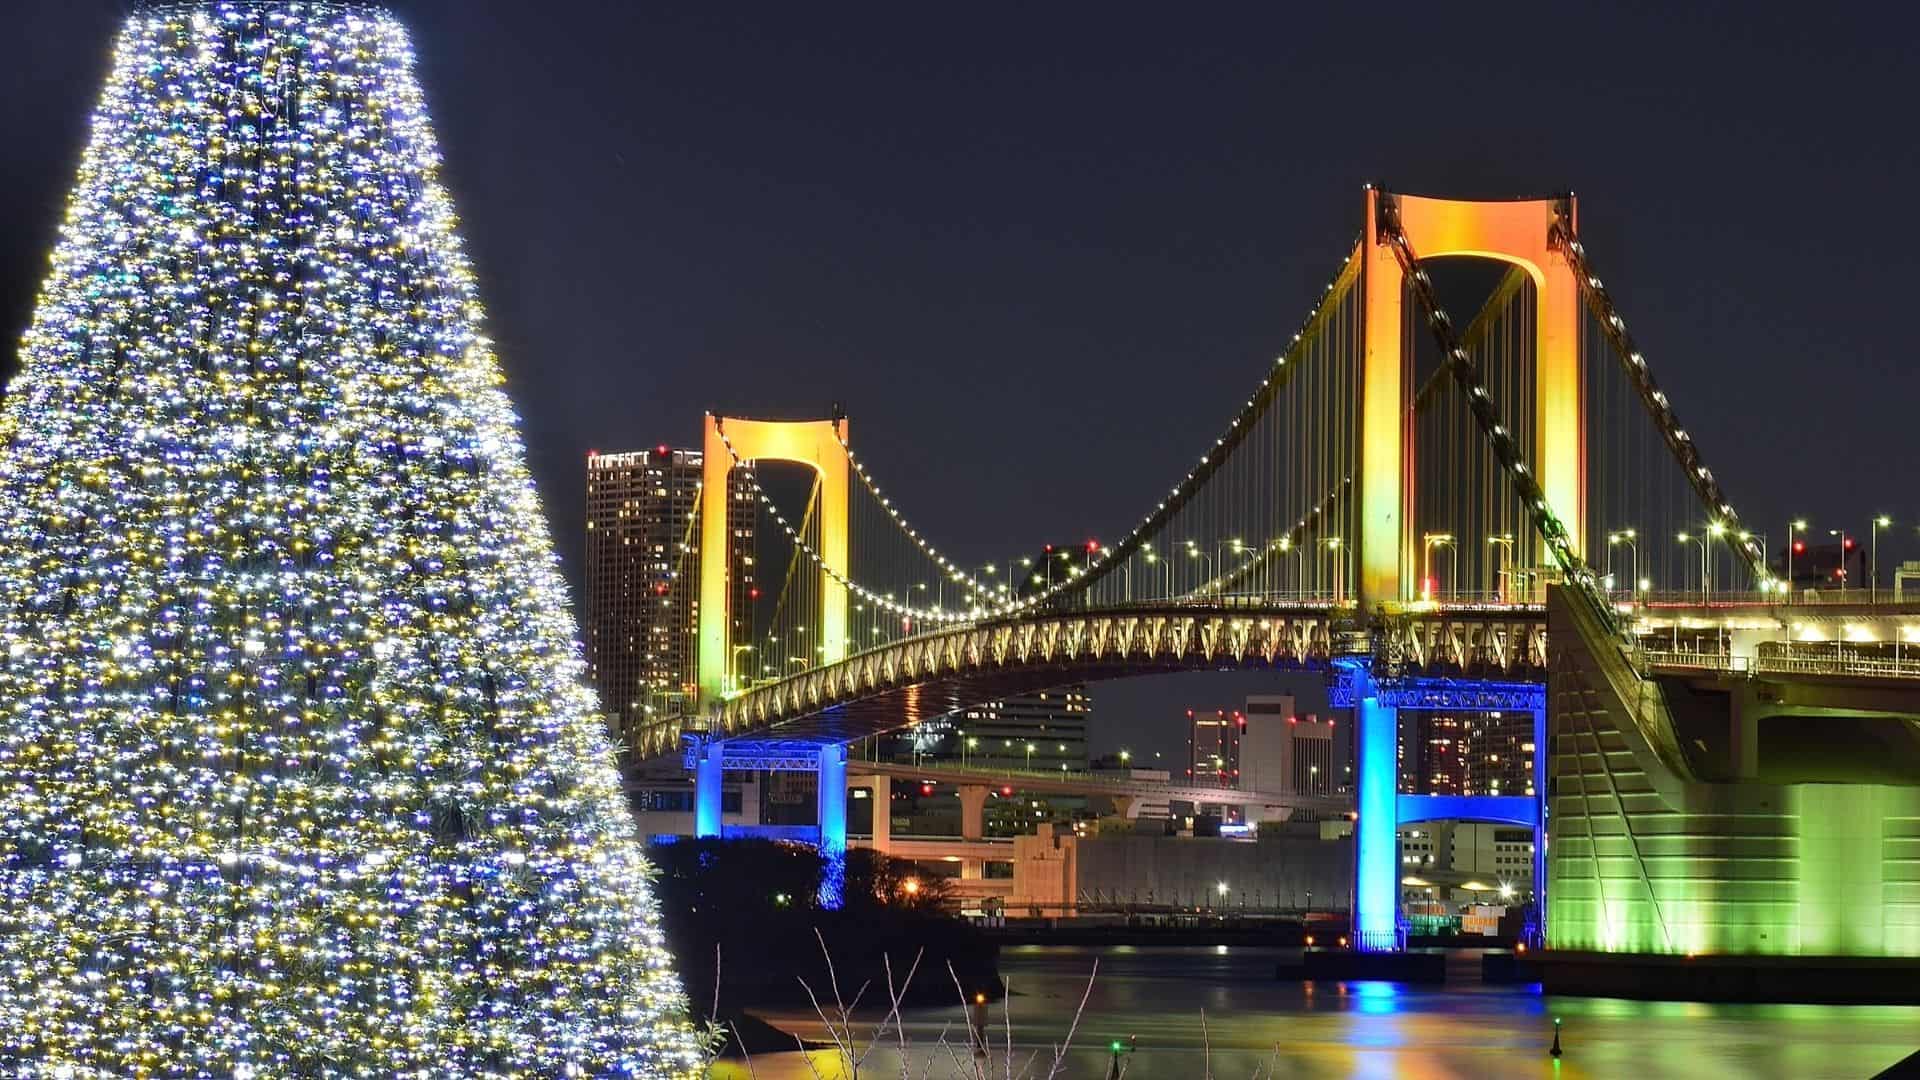 8 Best Winter illuminations in Japan you must check out